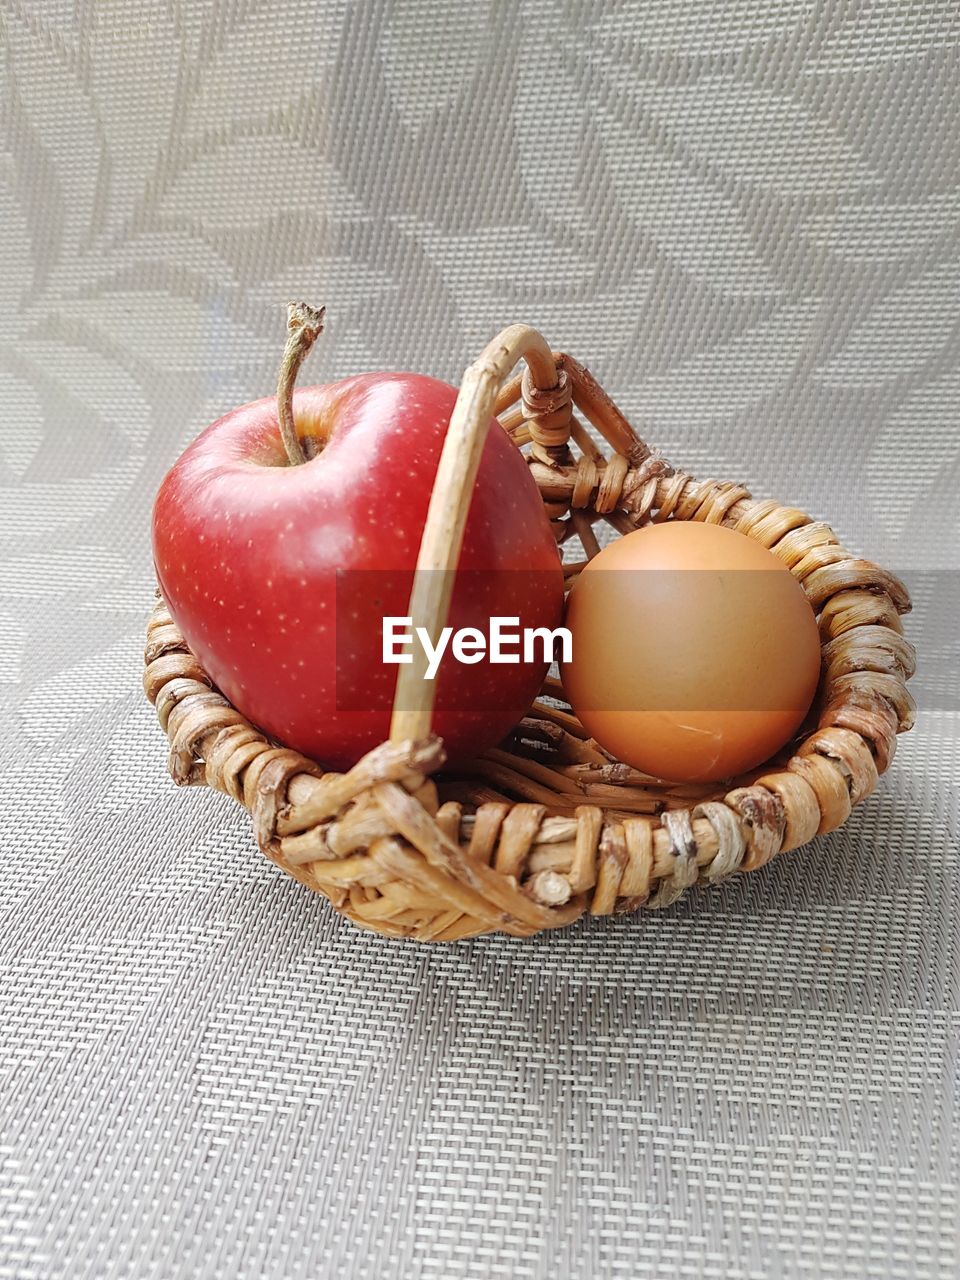 HIGH ANGLE VIEW OF APPLES IN BASKET